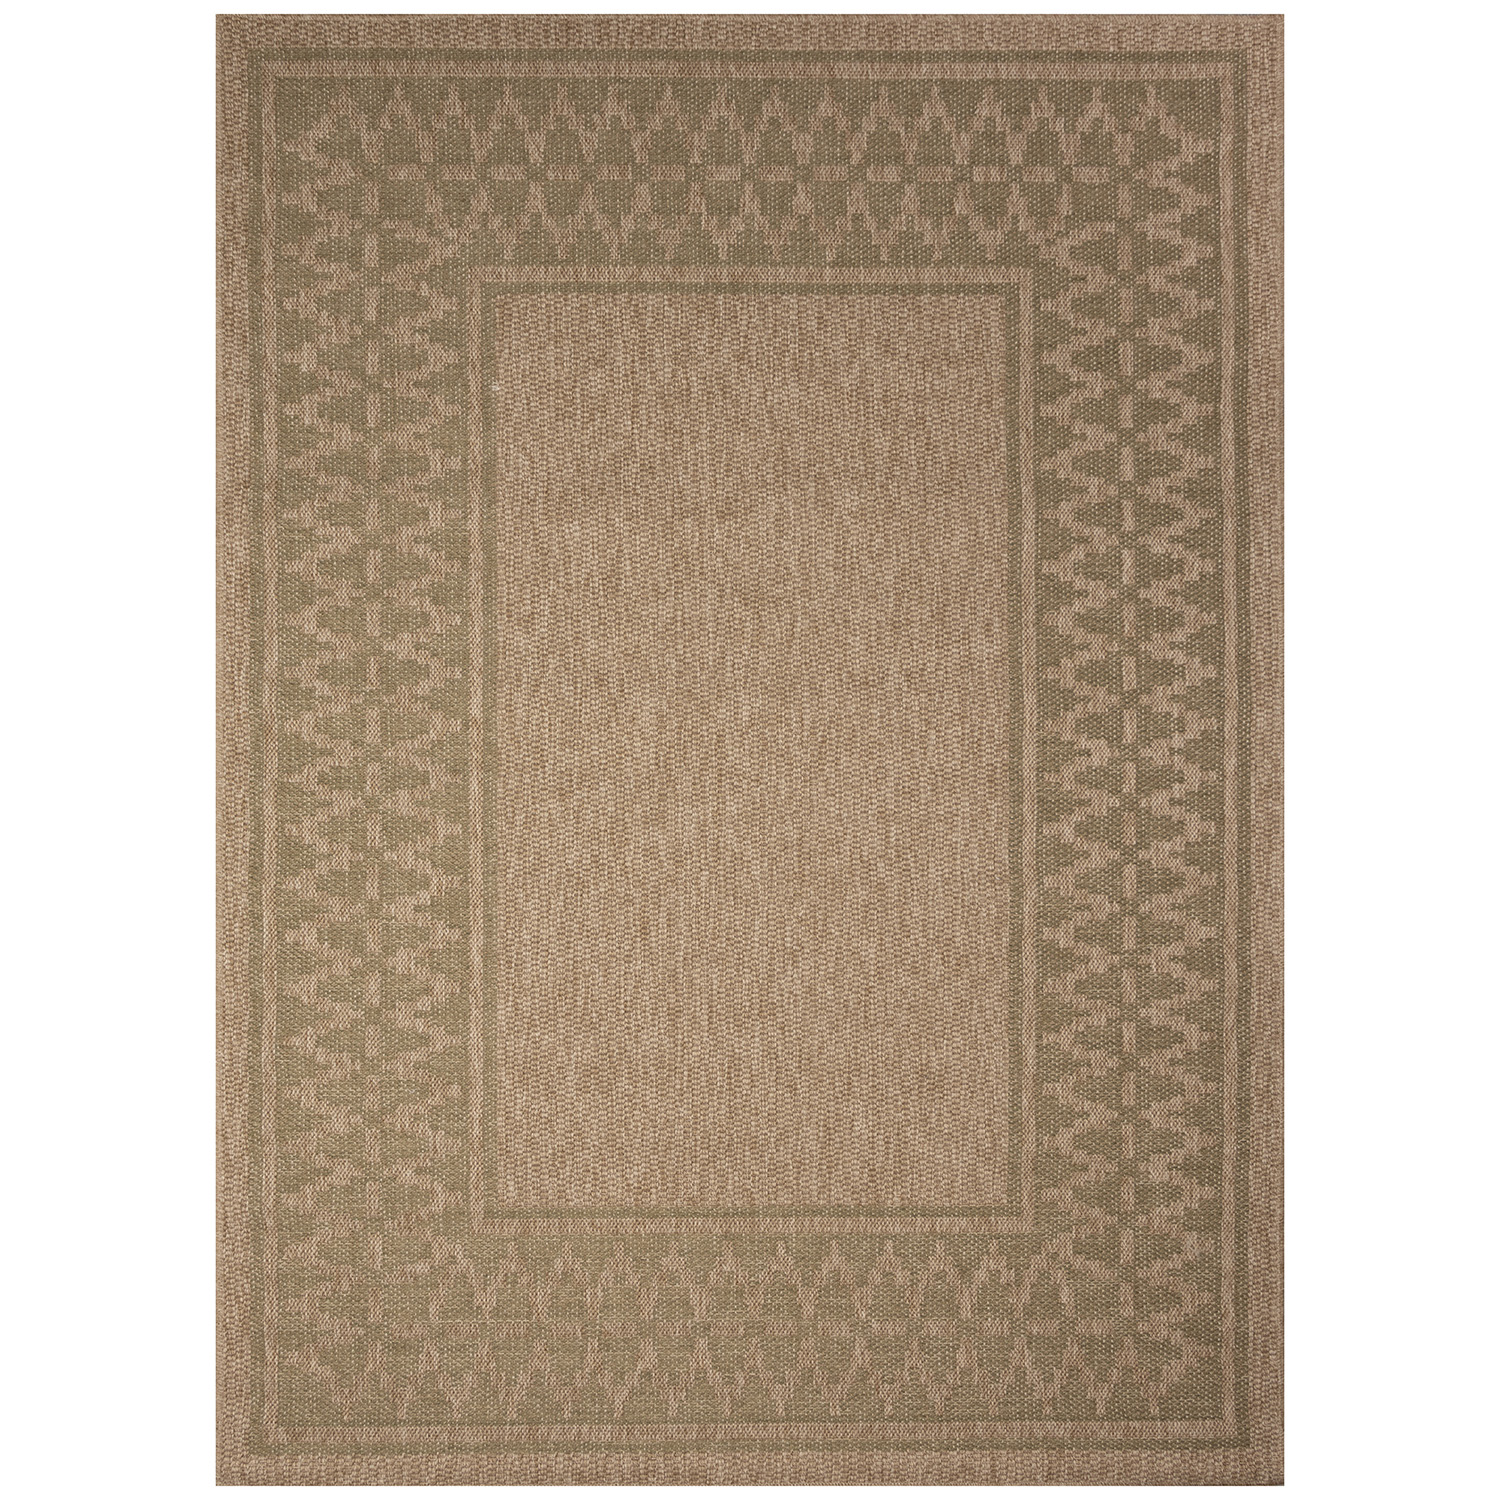 Liora Manne Sahara Low Profile  Easy Care Woven Weather Resistant Rug- Diamond Border Green  Product Image